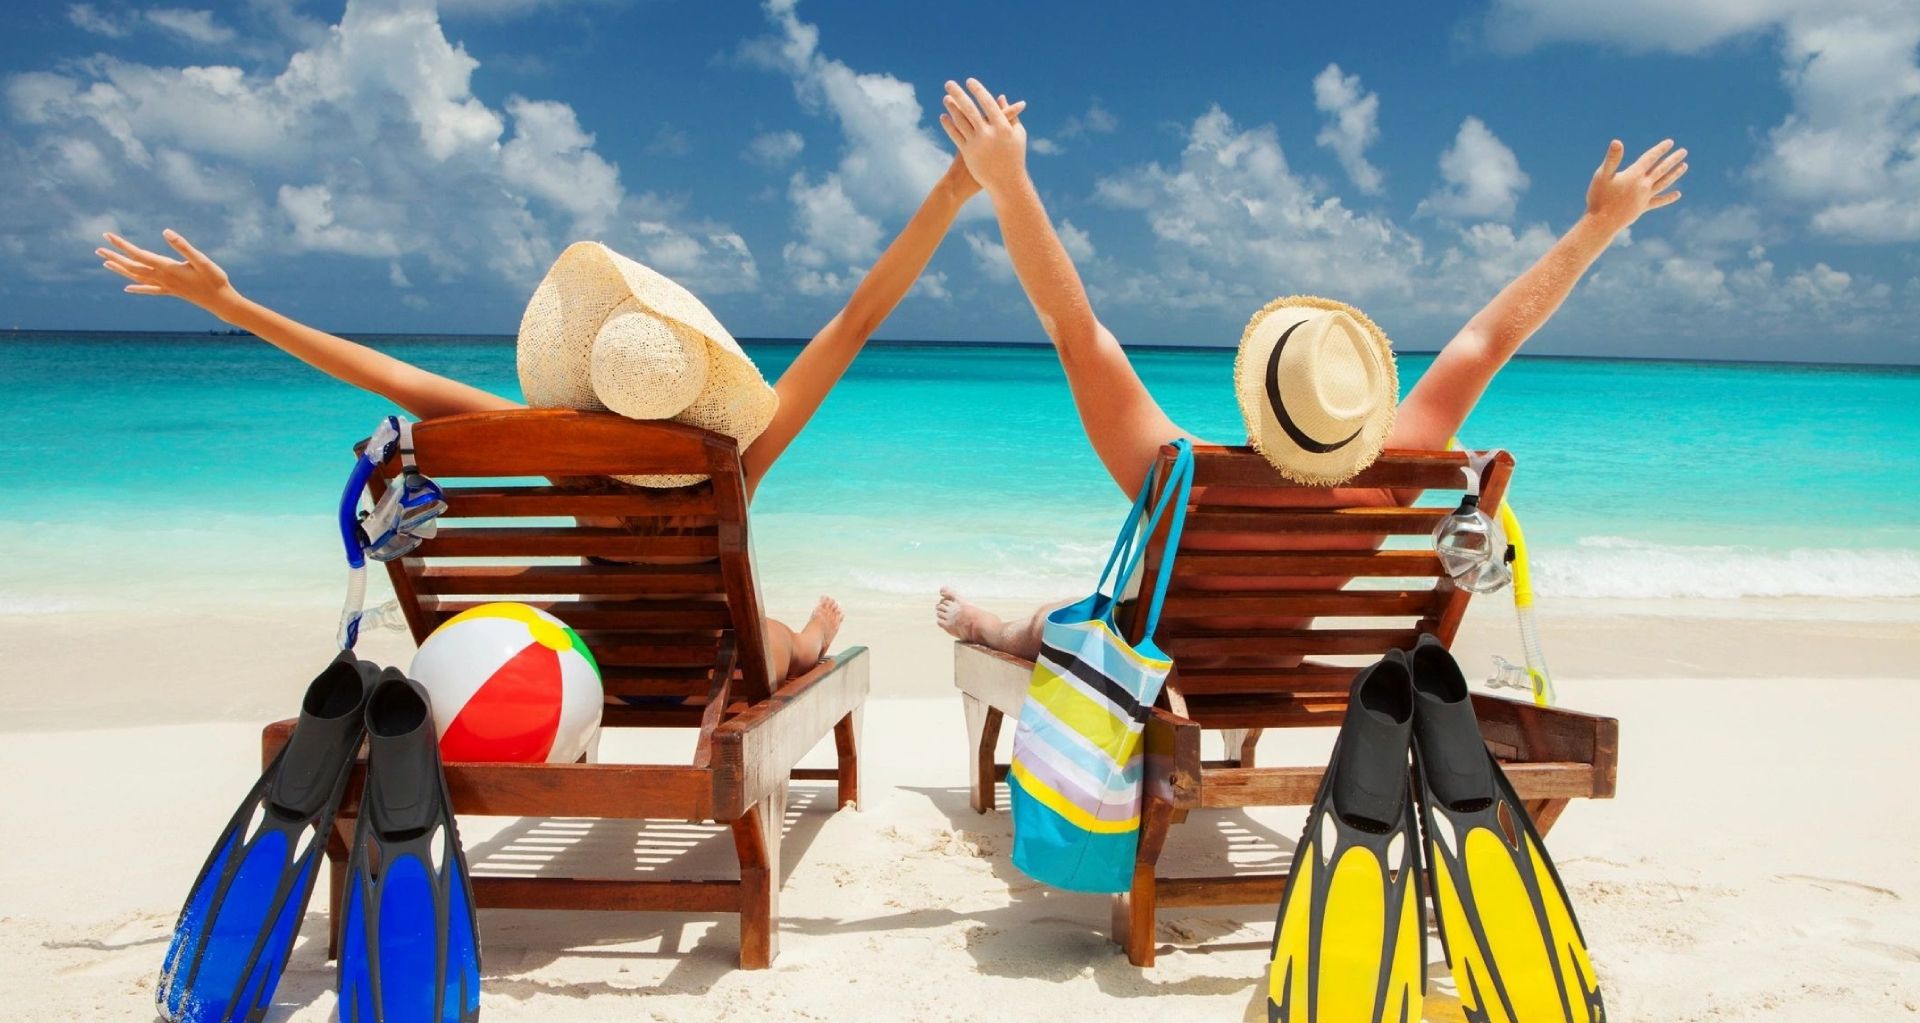 Two women sitting on a beach chair with their arms raised.